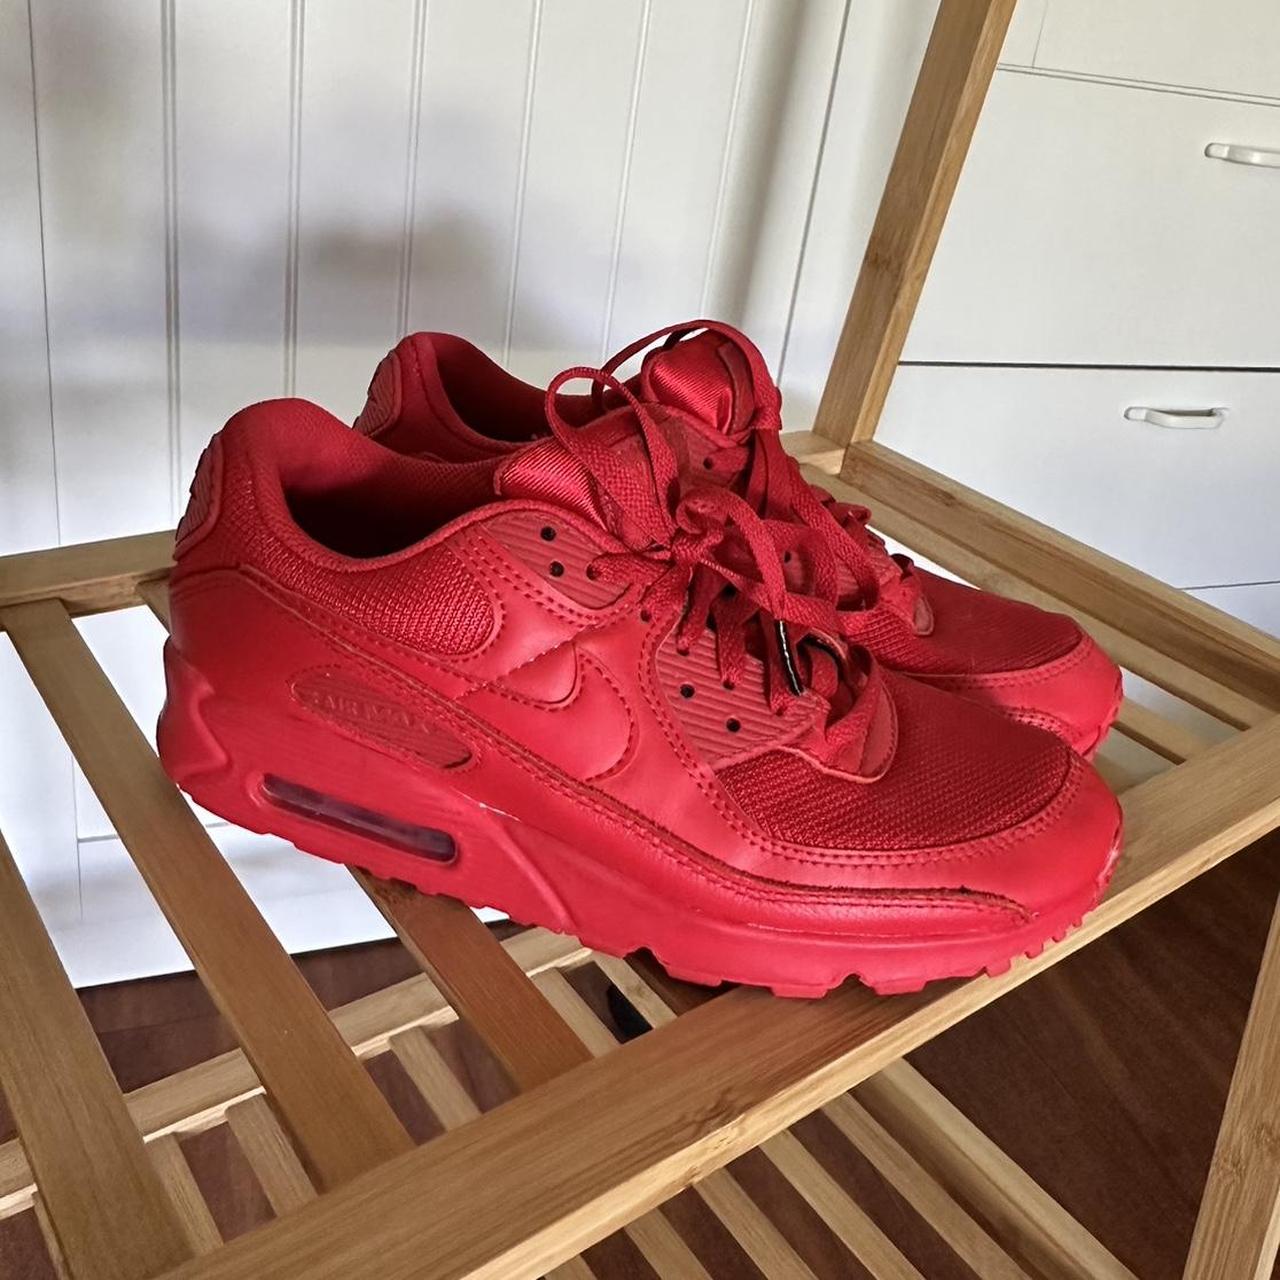 Nike Air Max 90 US 7 Worn once, have been sitting... - Depop